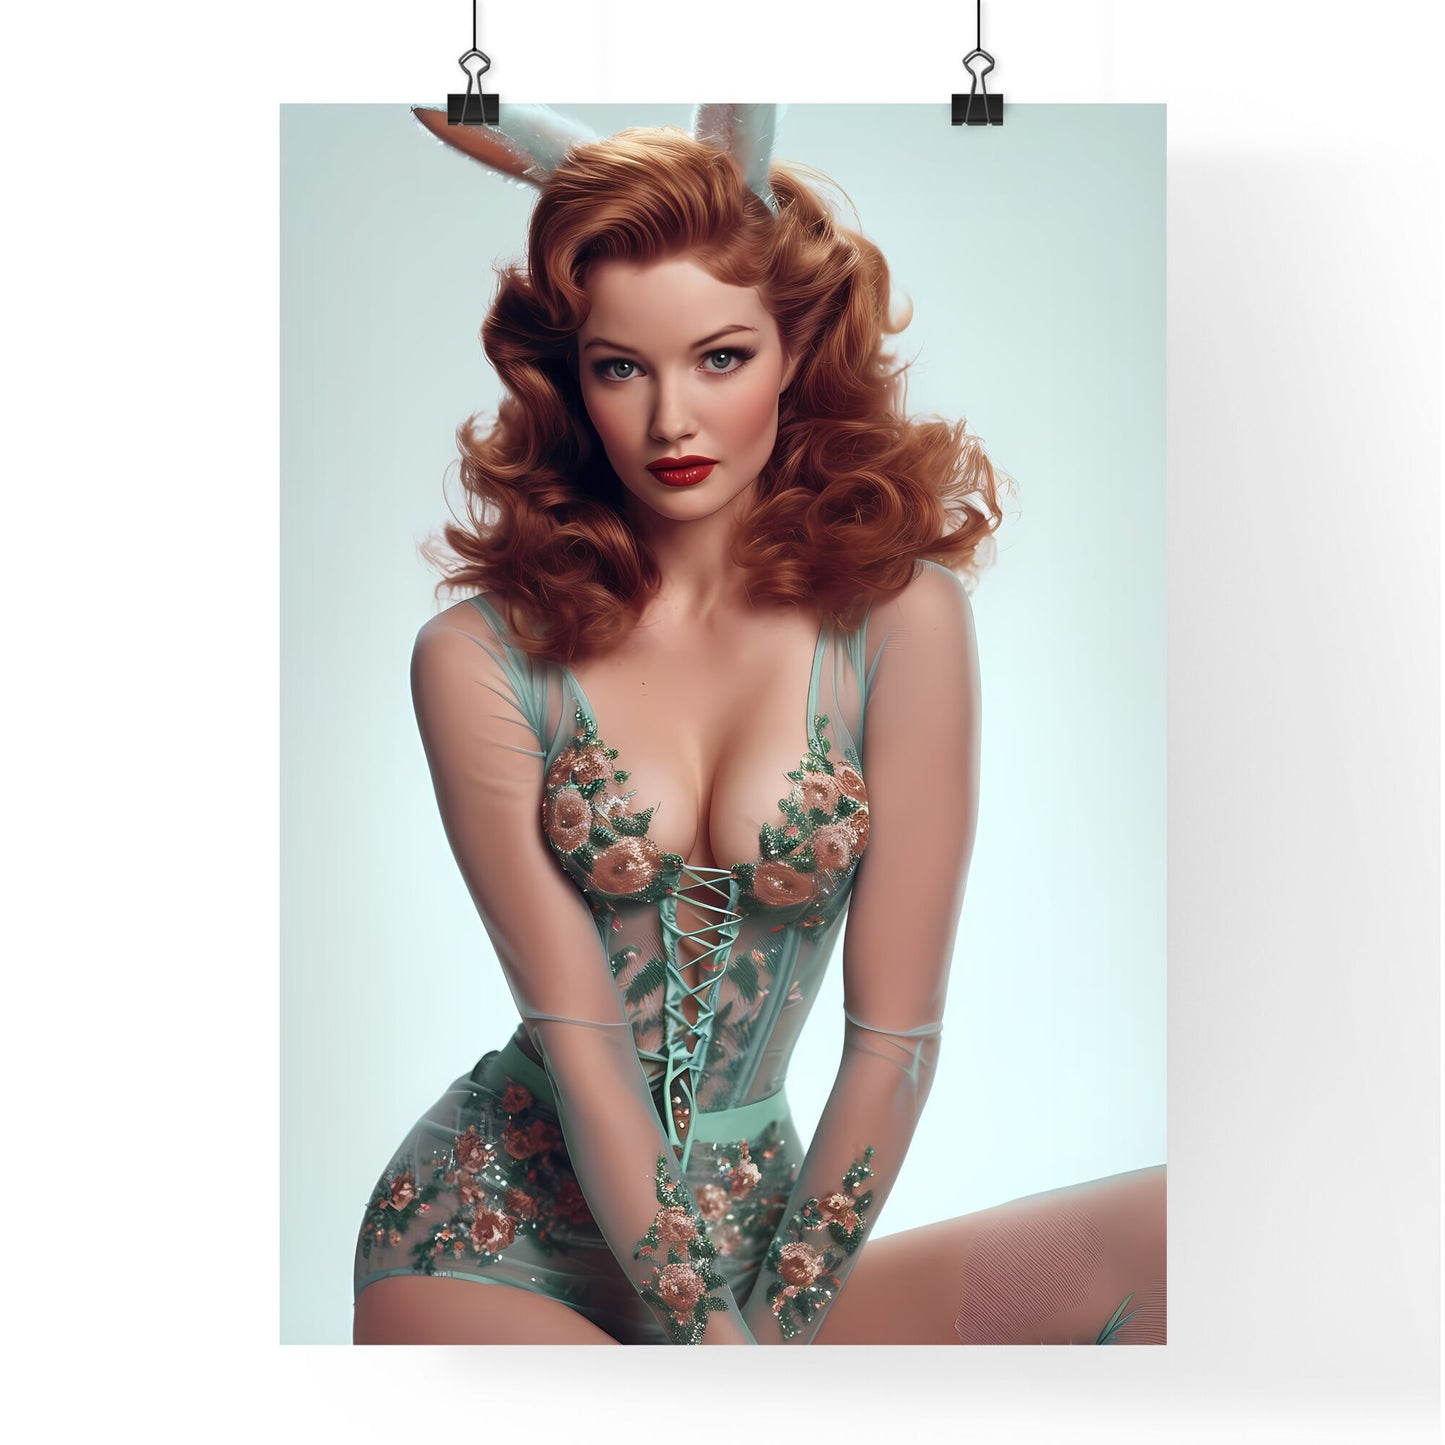 Poster of a pin up with white background - Art print of a woman in a green dress Default Title